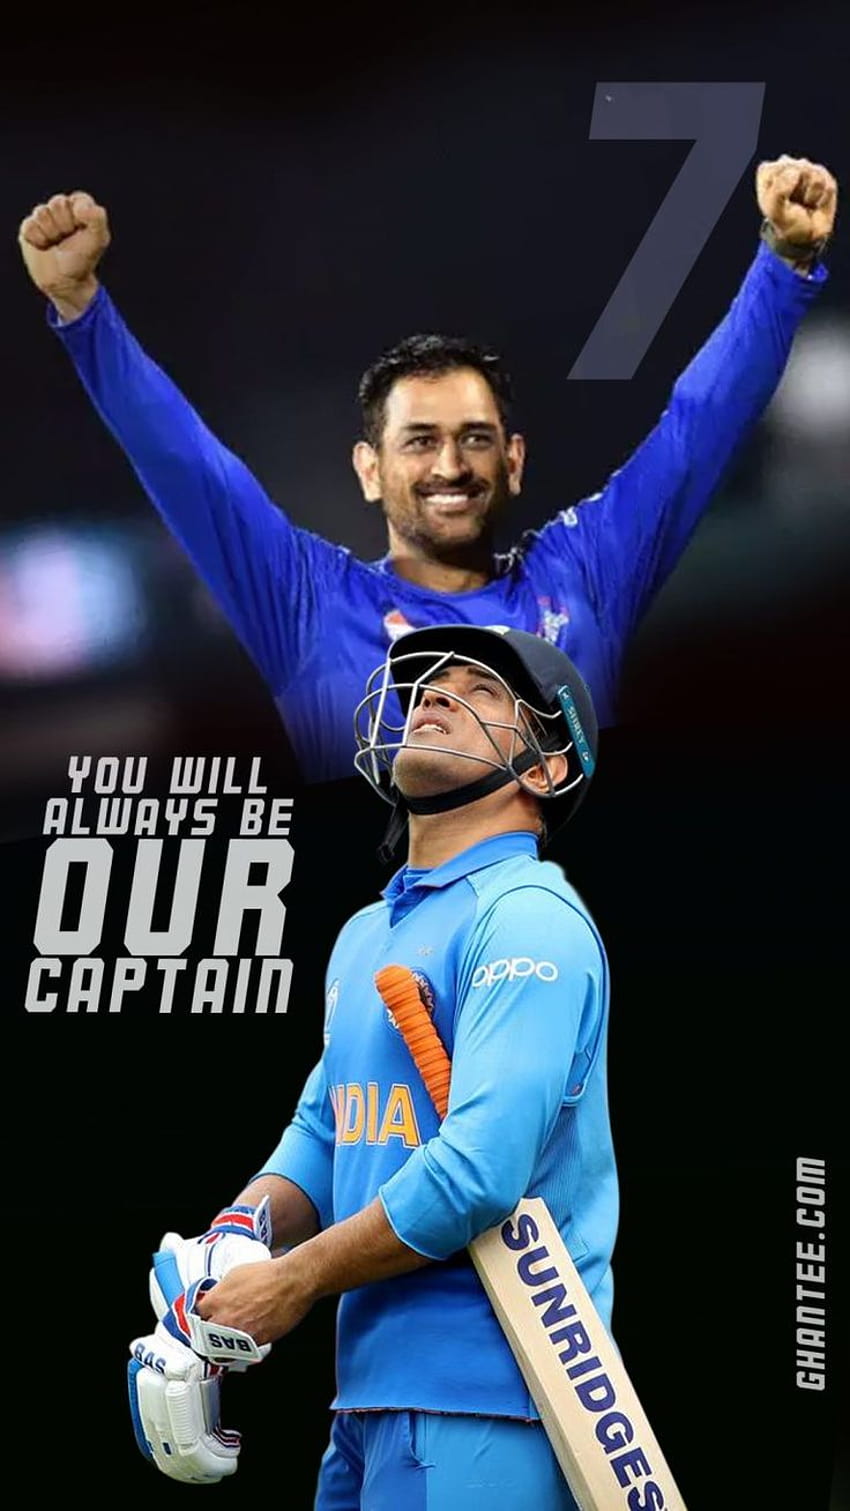 MS Dhoni CSK Images & HD Wallpapers for Free Download: Get Dhoni HD Photos  in Chennai Super Kings Jersey Ahead of IPL 2023 to Share Online | 🏏  LatestLY